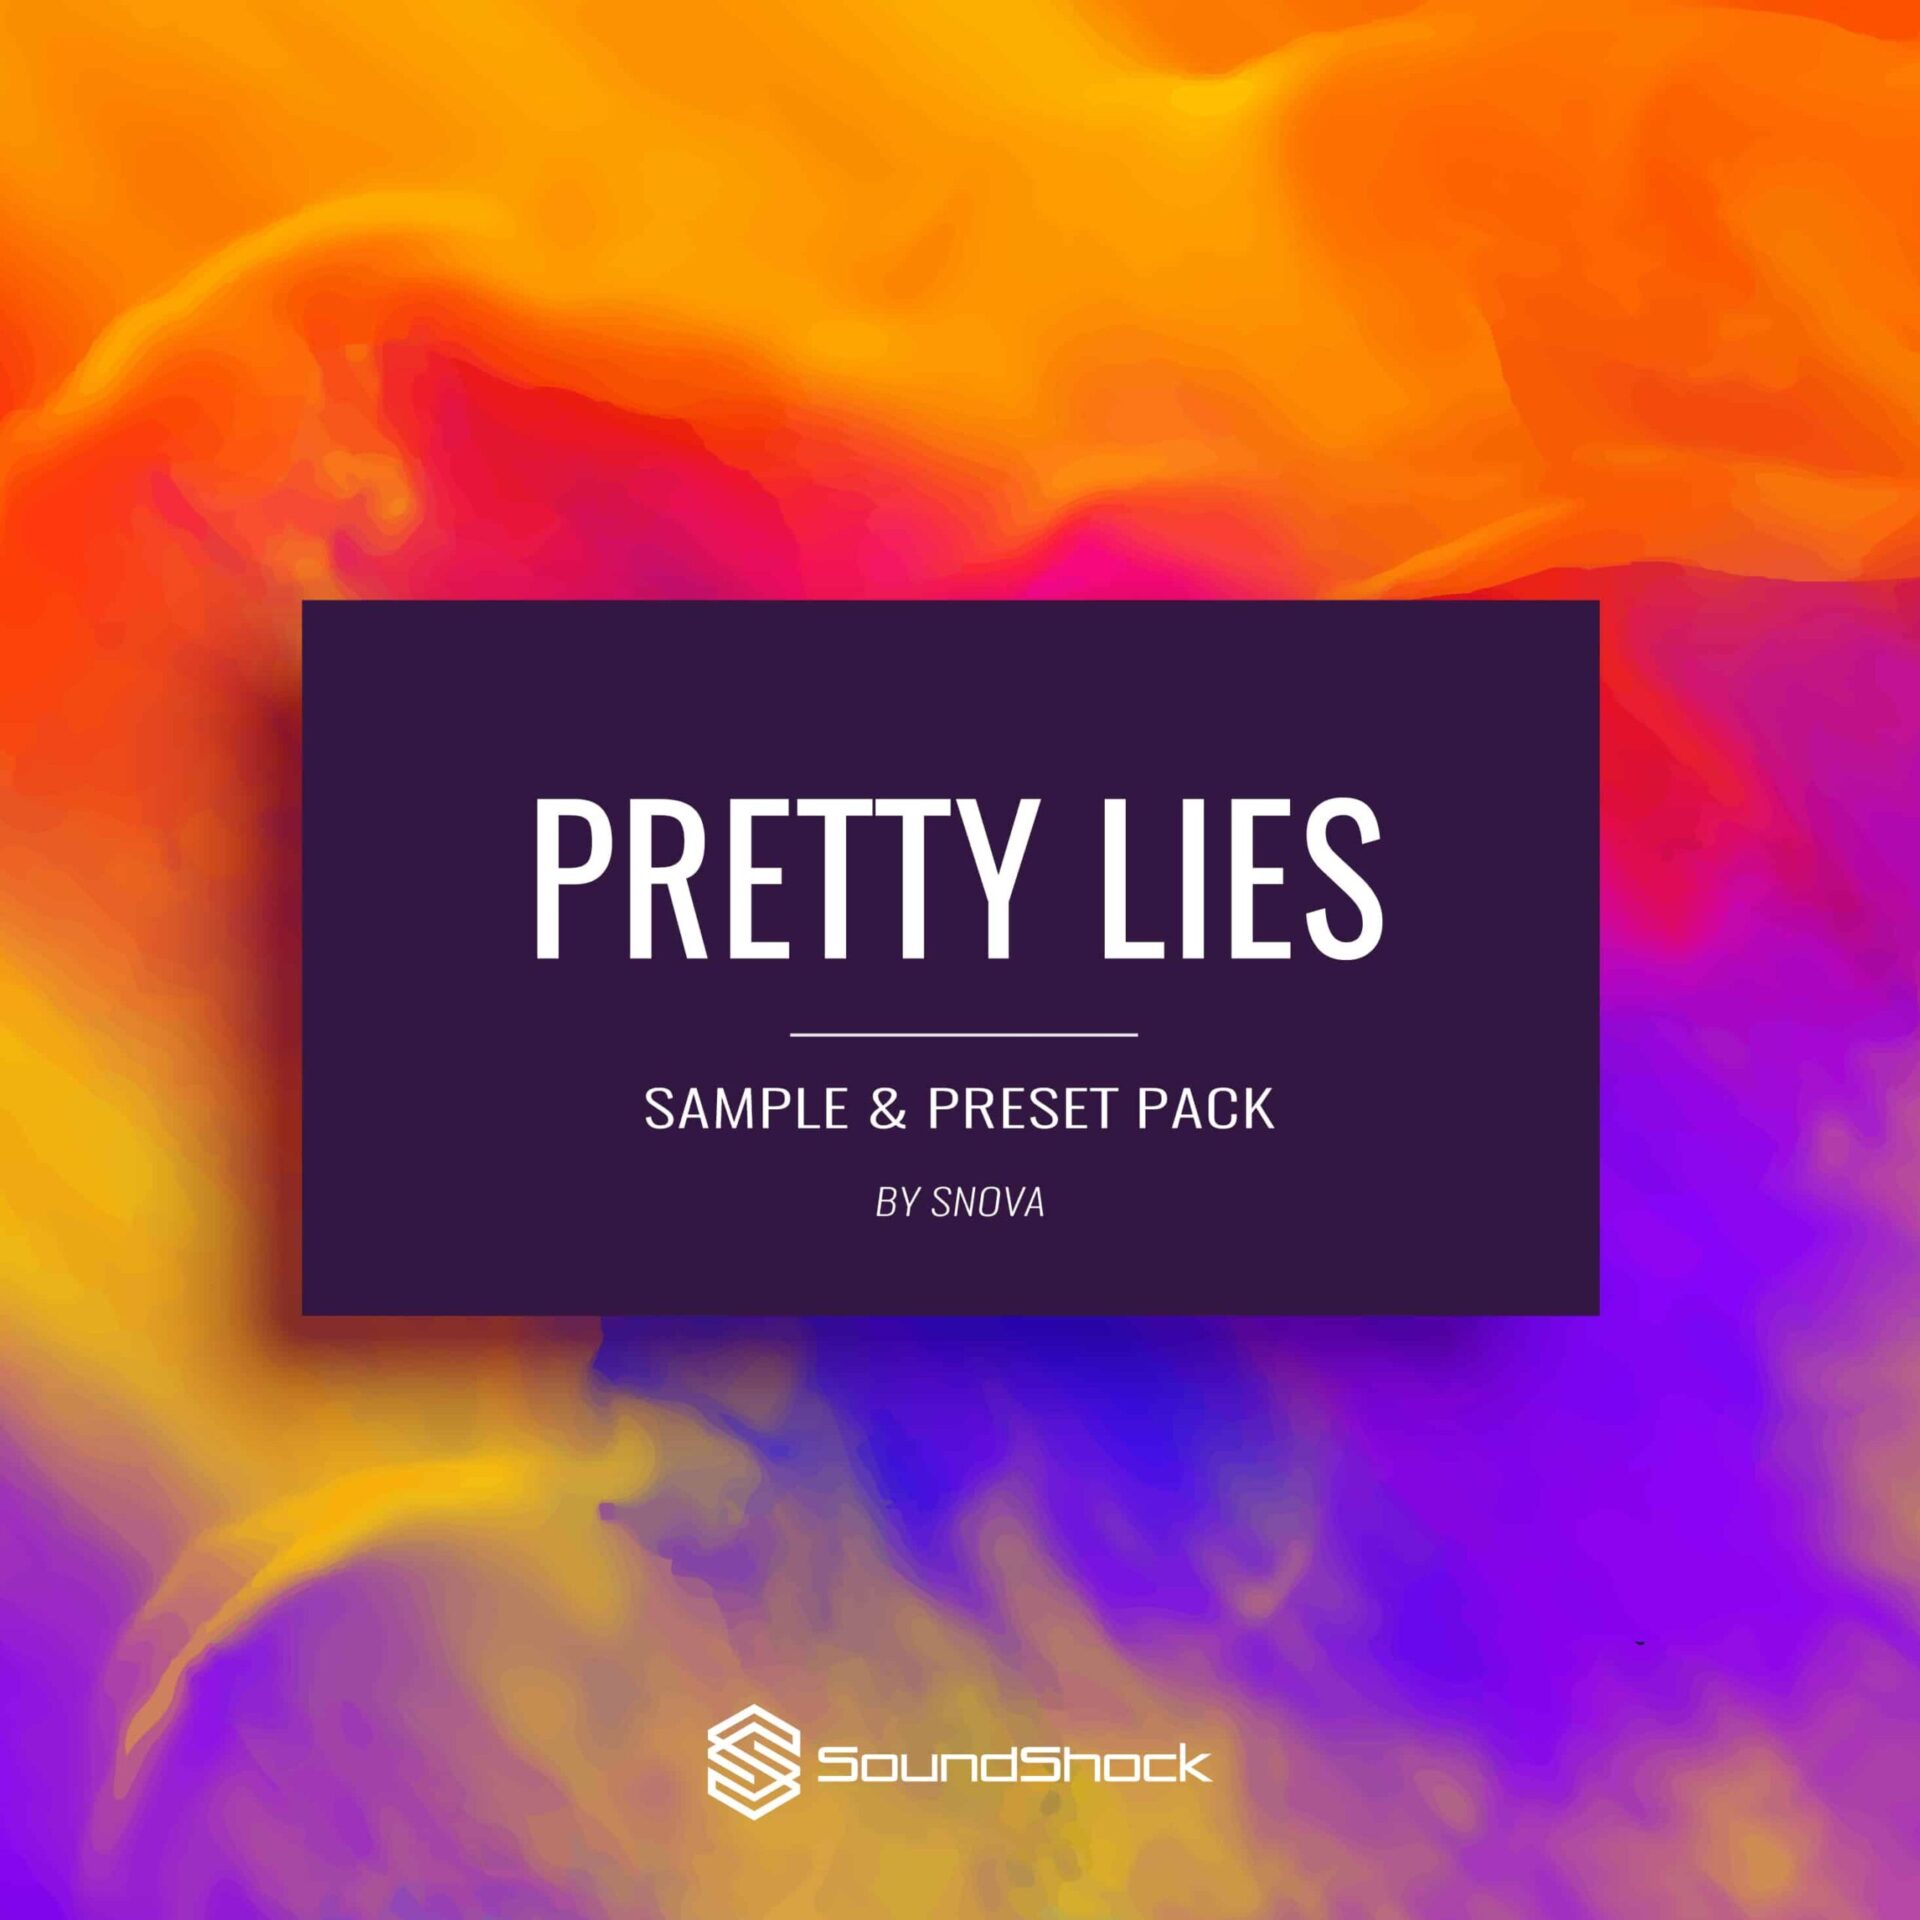 Introducing the "Pretty Lies" sample & preset pack.